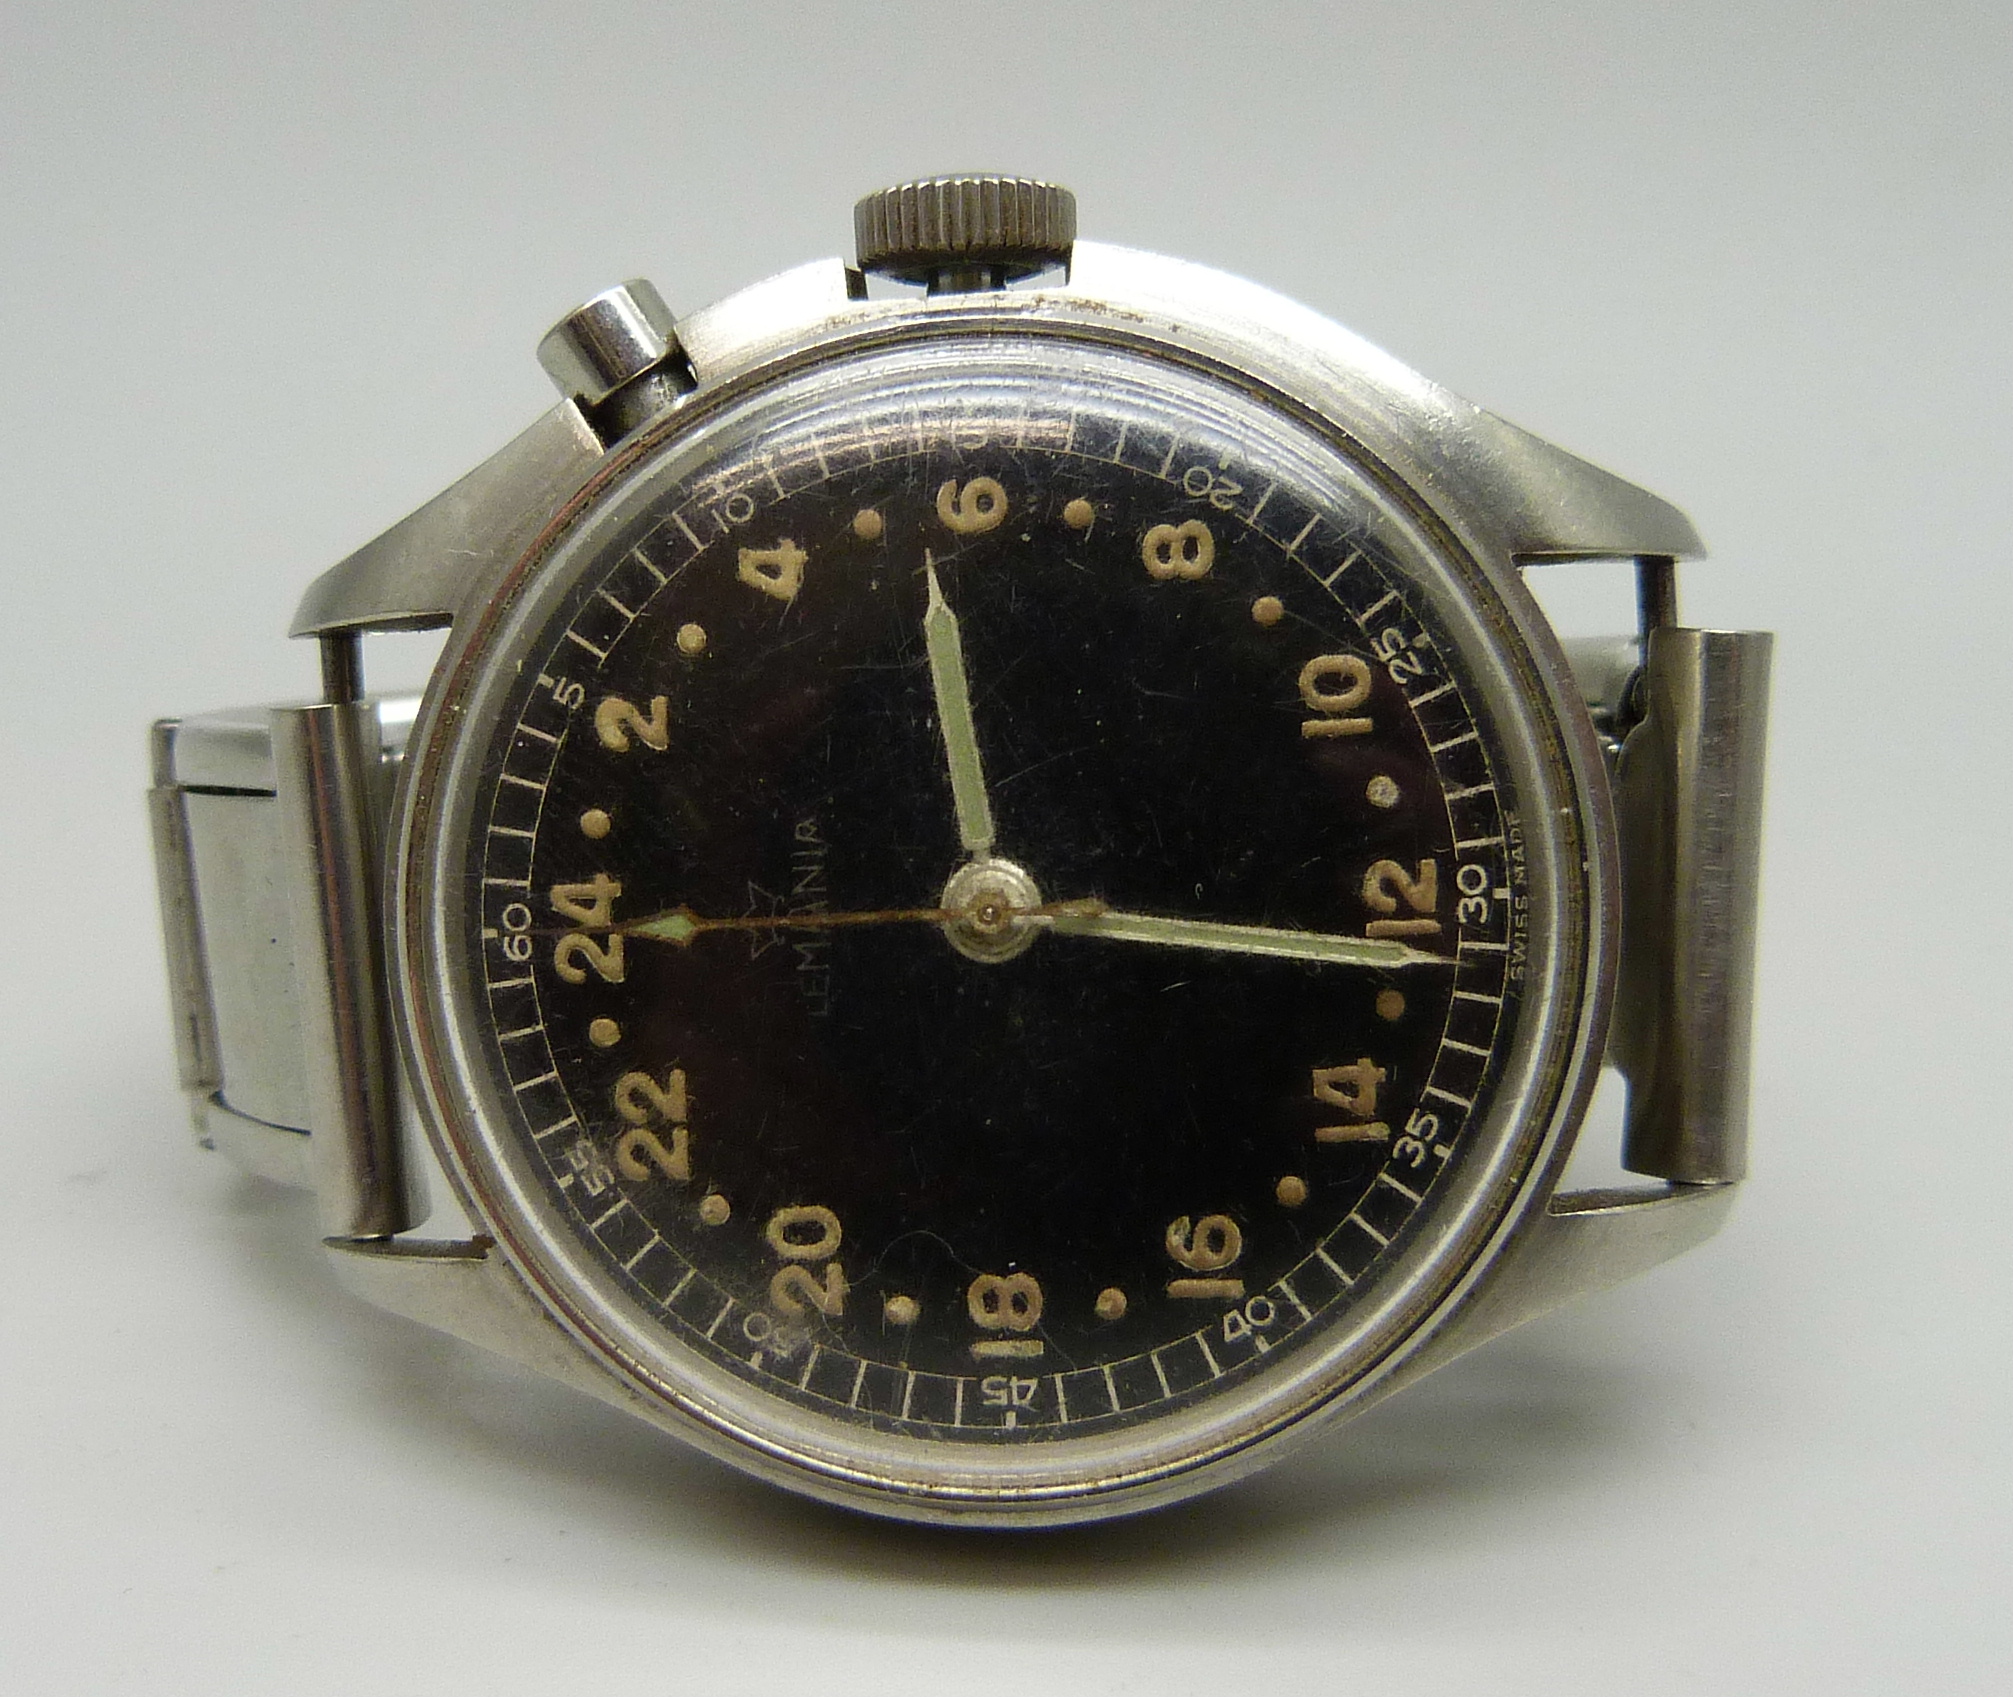 A German Lemania single button chronometer with 24-hour clock and sweep second hand, 39mm case